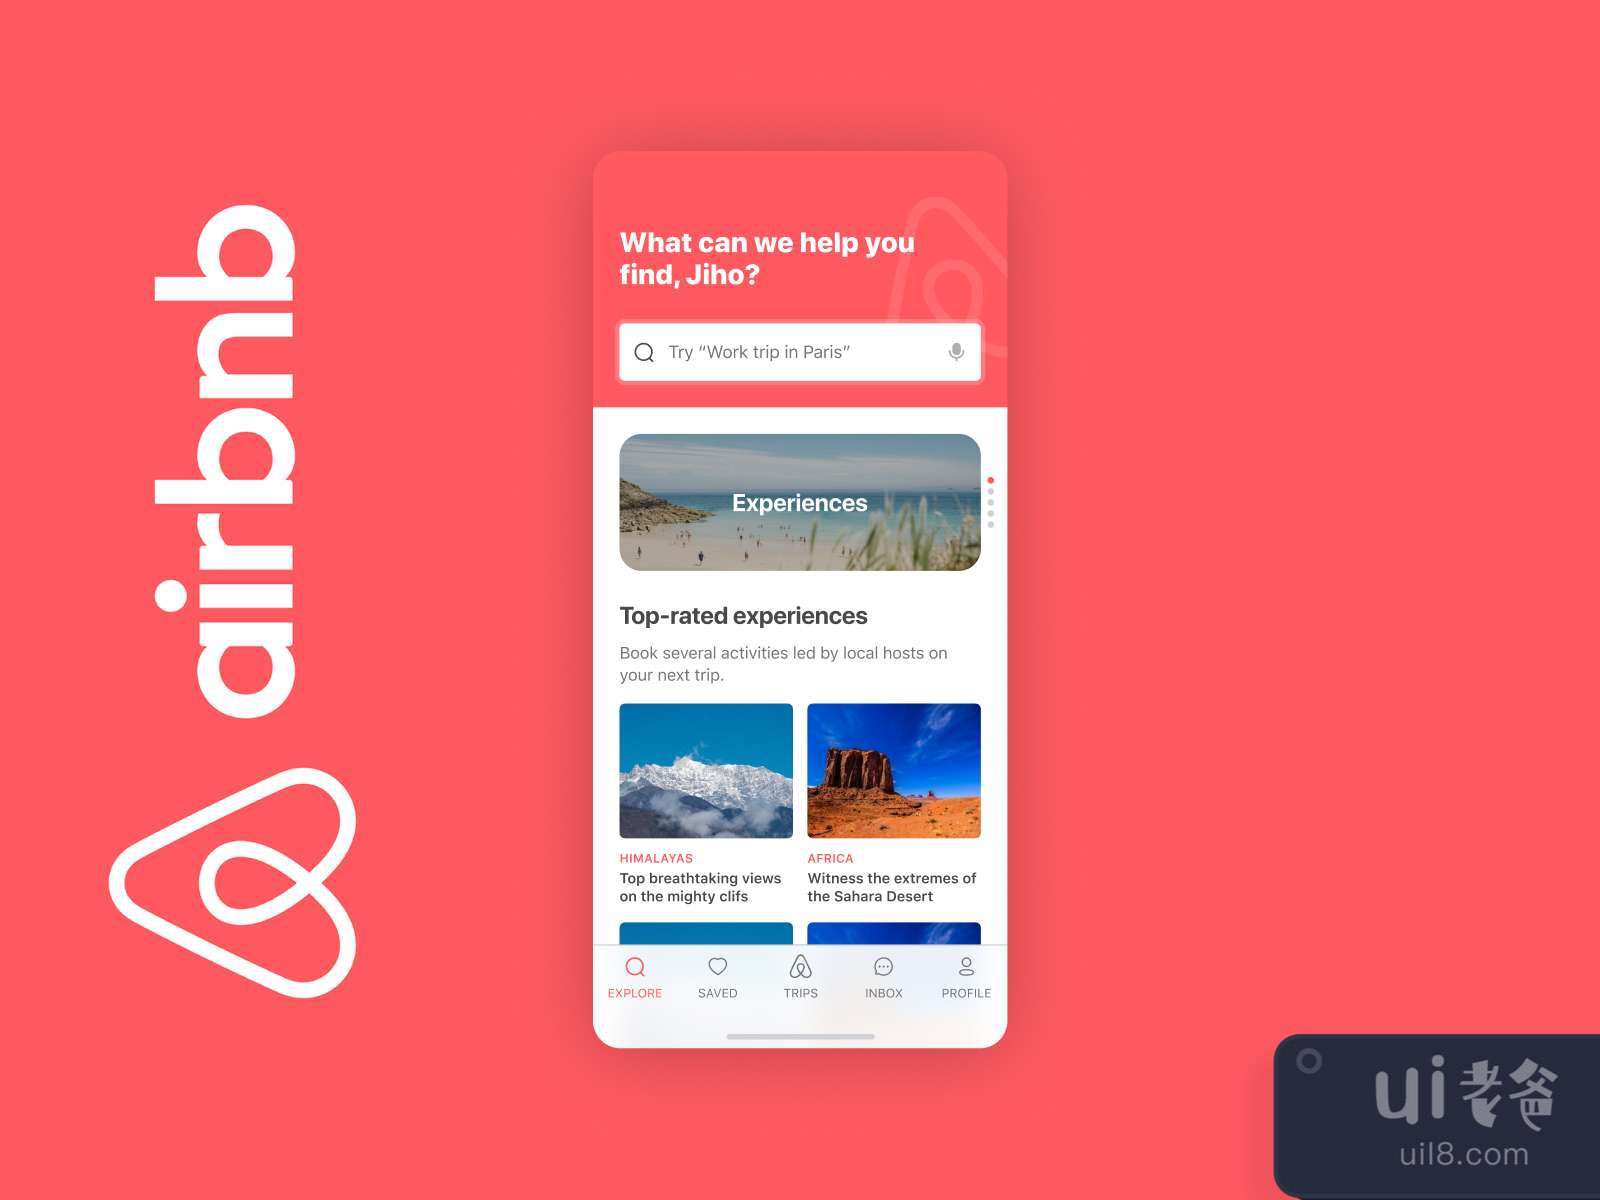 Airbnb Hotel Booking for Figma and Adobe XD No 4